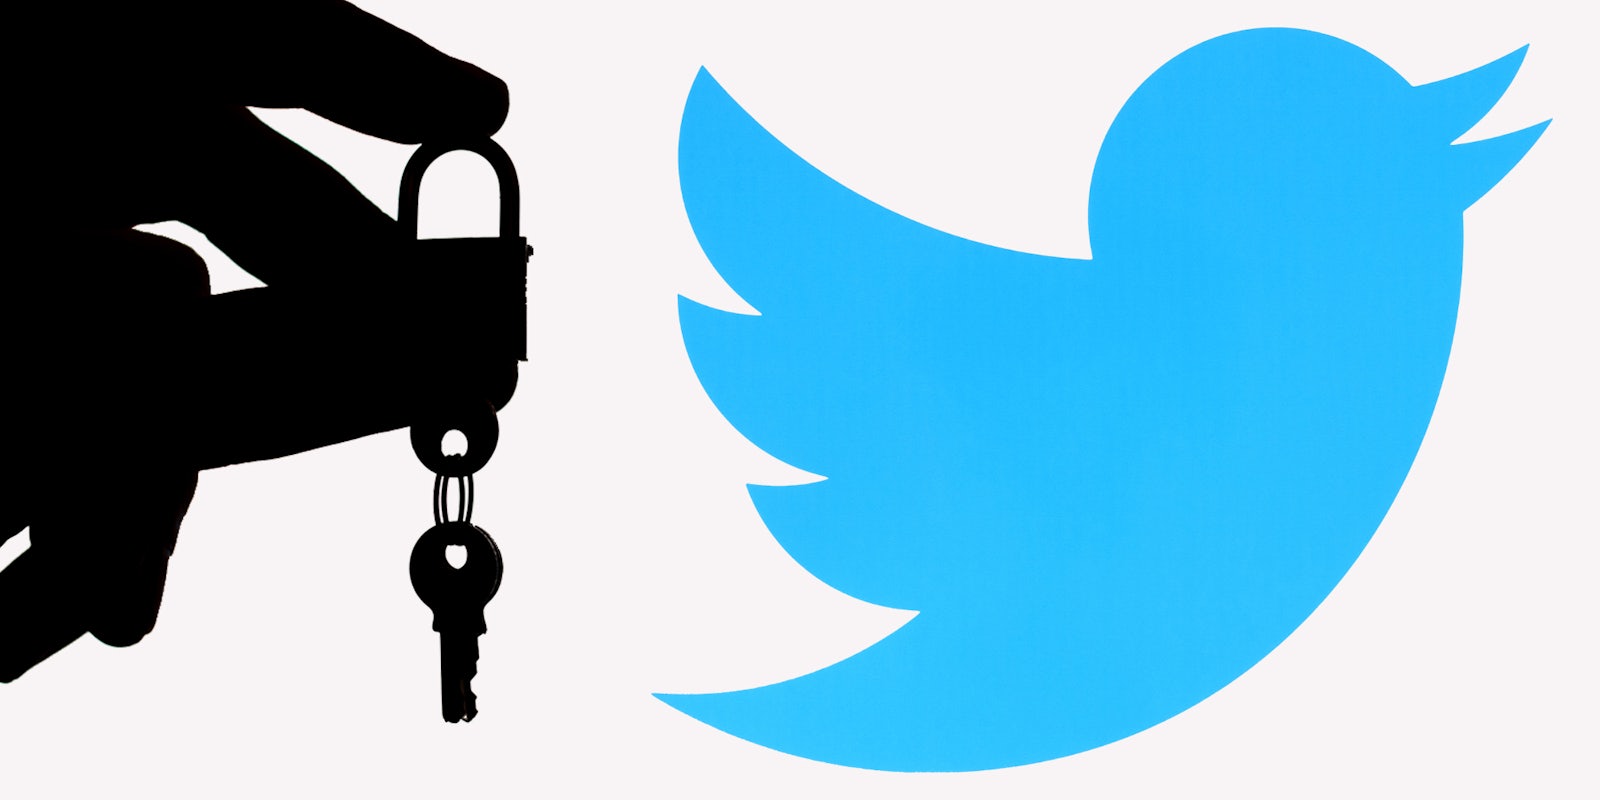 Hand holding lock with keys inside silhouette in front of white background with Twitter bird logo to right